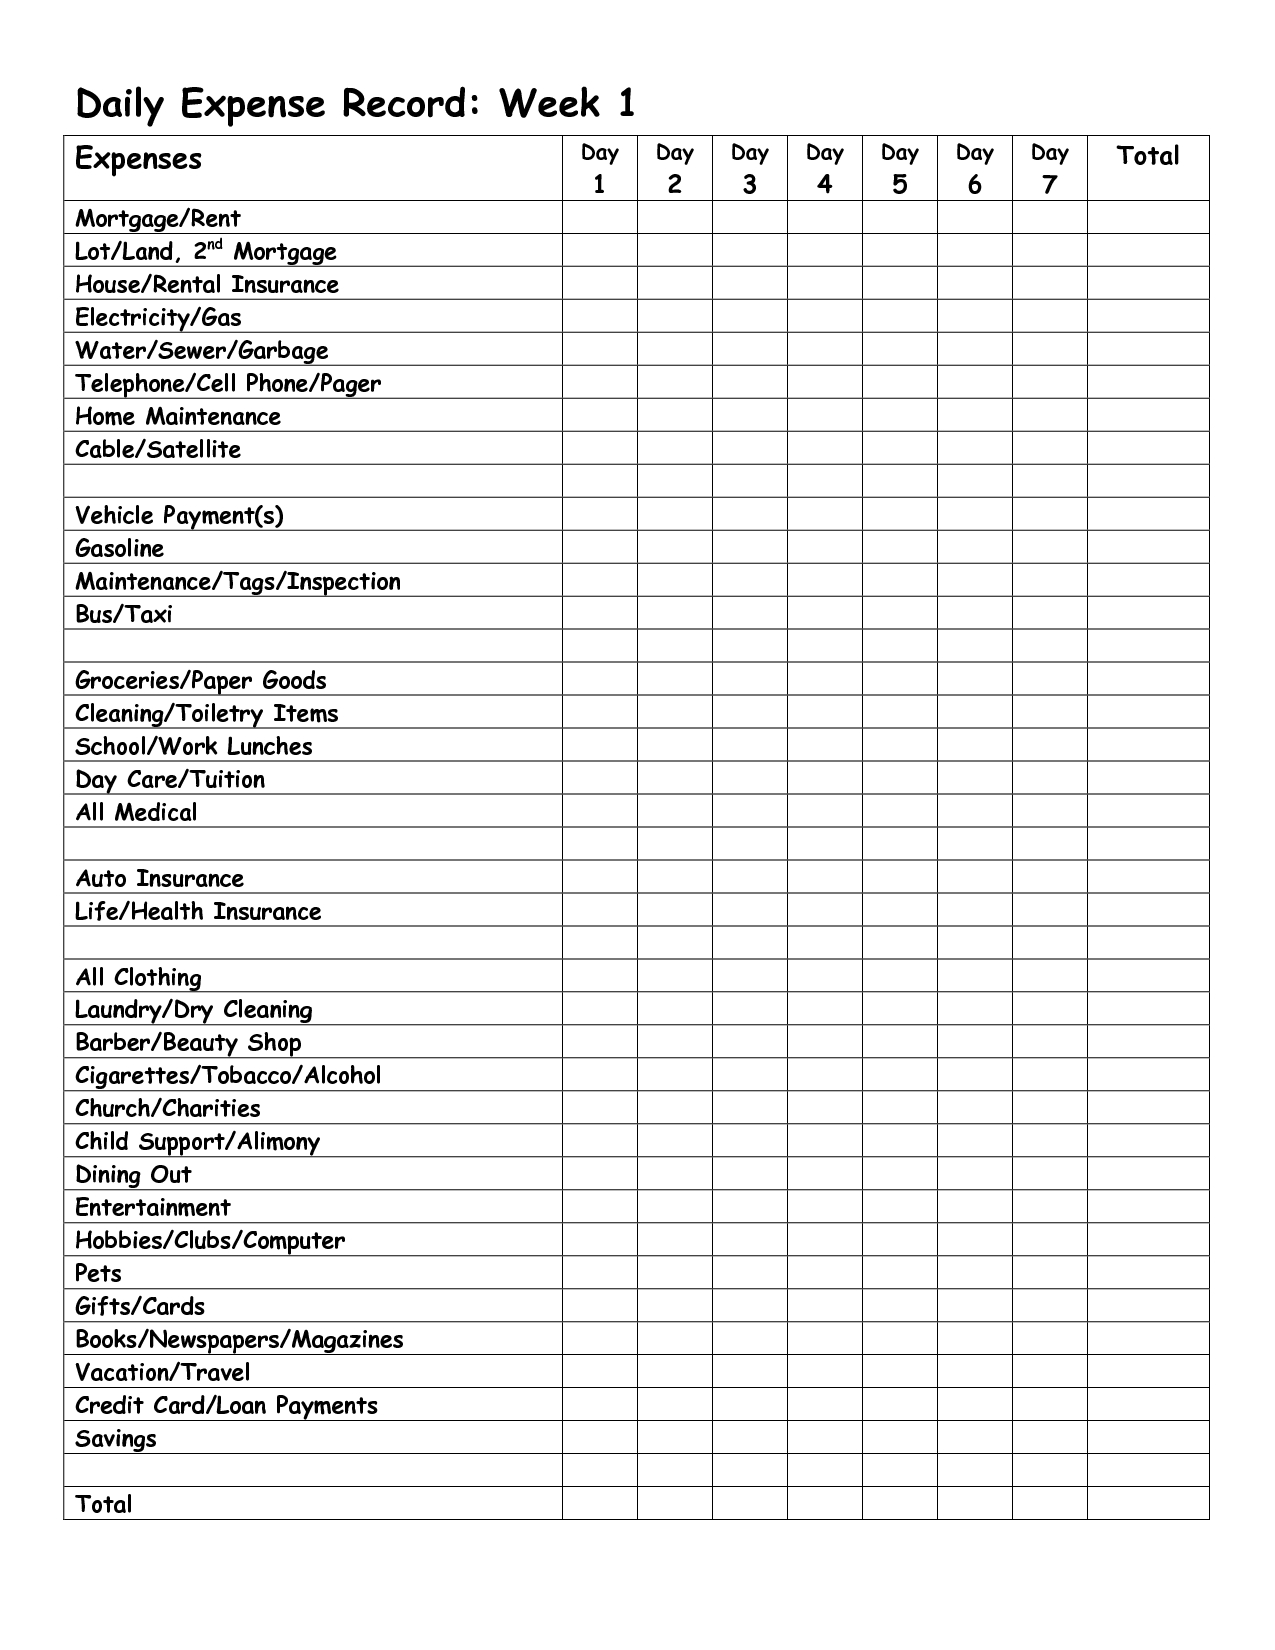 Monthly Expense Report Template | Daily Expense Record Week Regarding Daily Expense Report Template